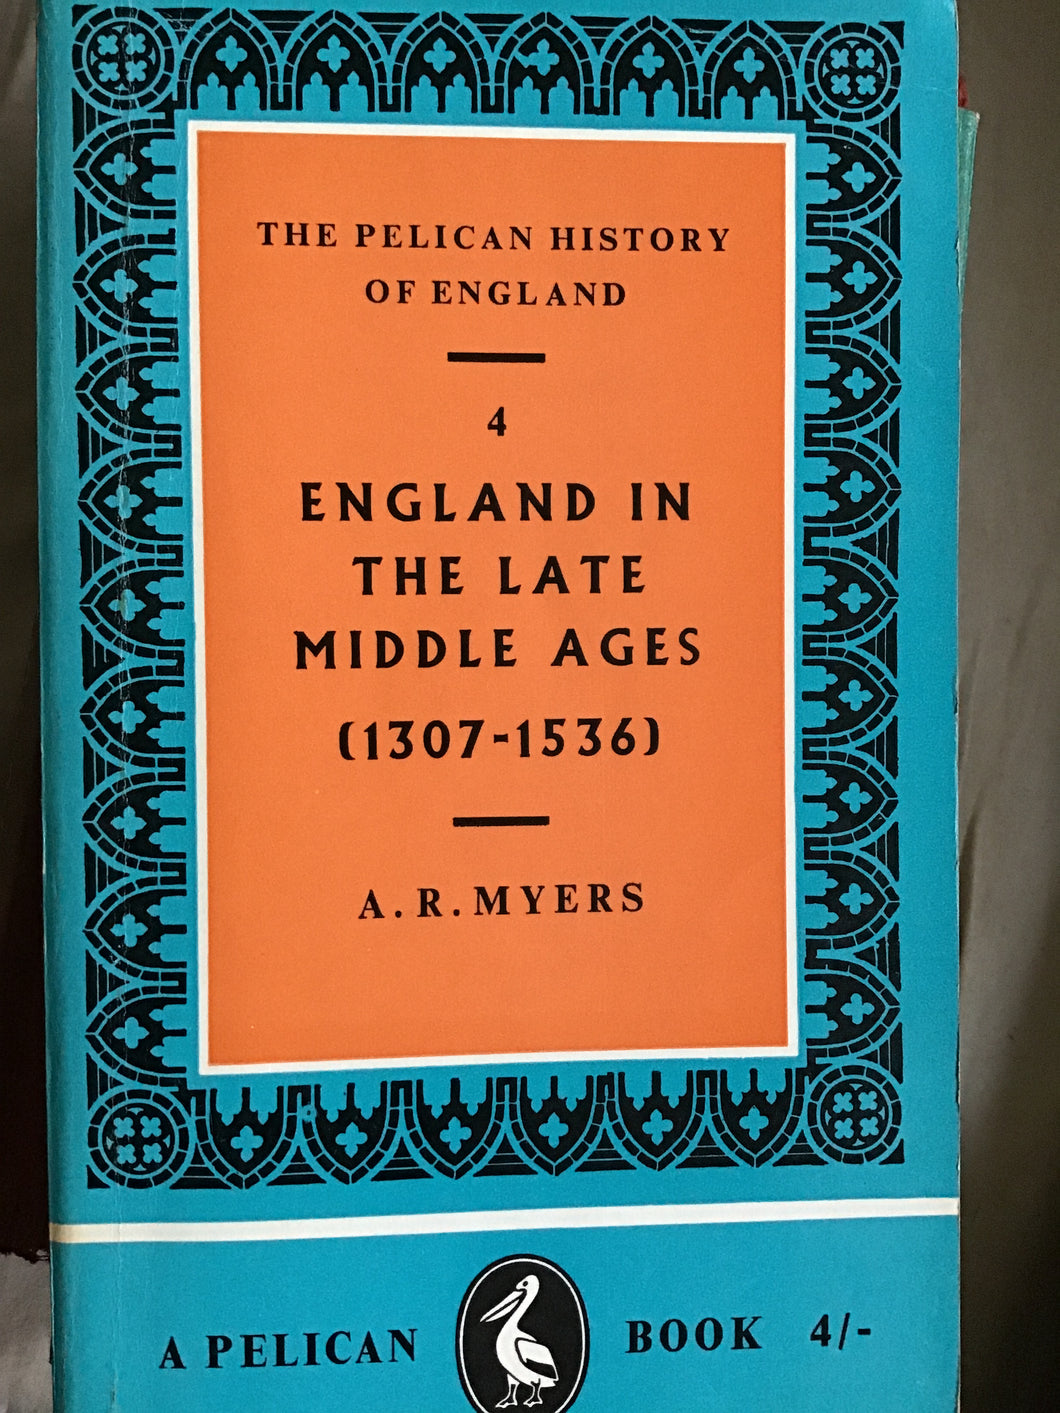 England in the Late Middle Ages (Pelican Books. no. A234. Pelican History of England. vol. 4.)